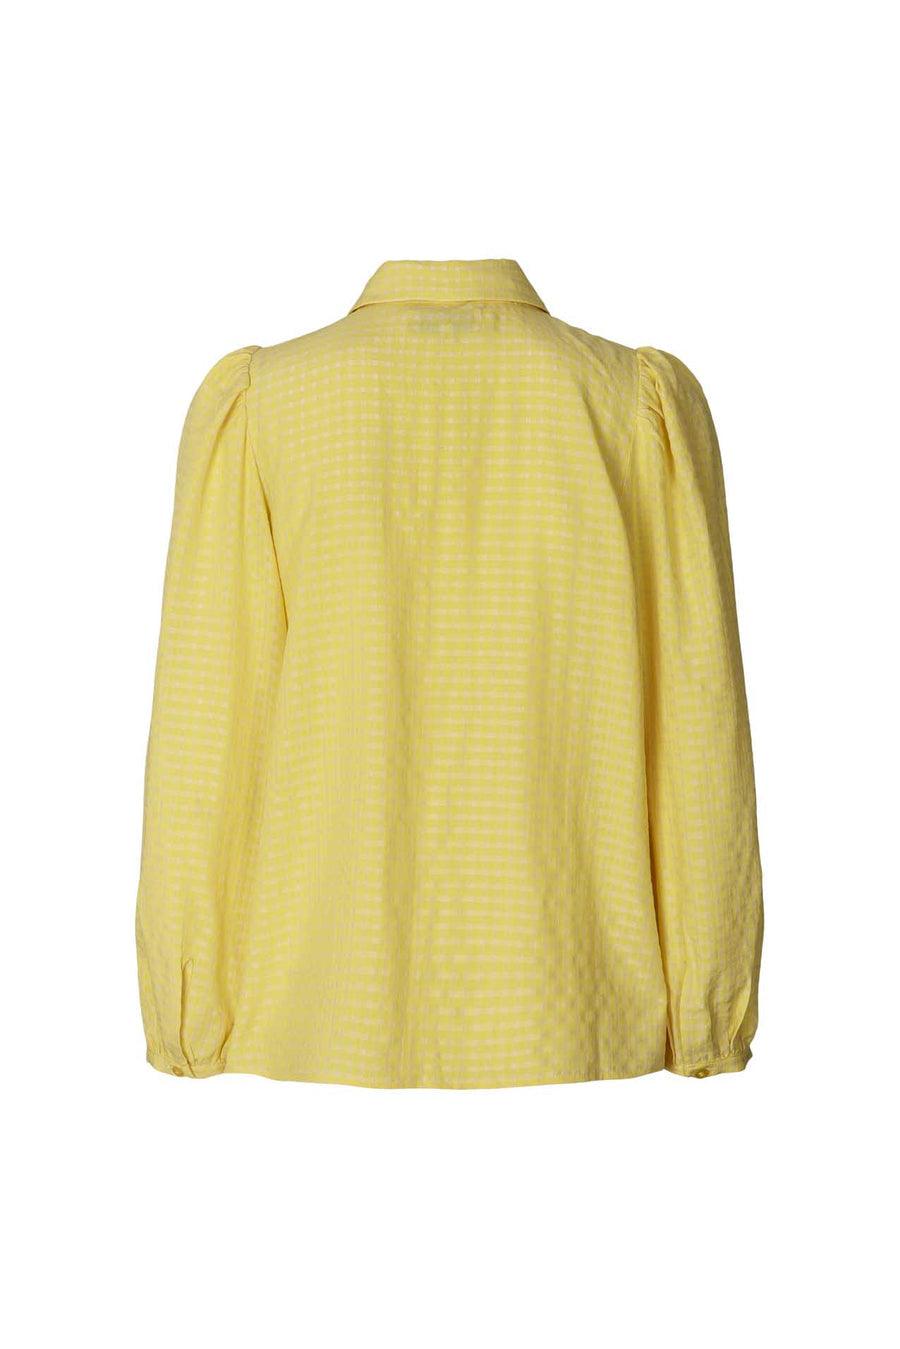 Ellie Shirt Yellow | Lolly’s Laundry | Orchid Boutique